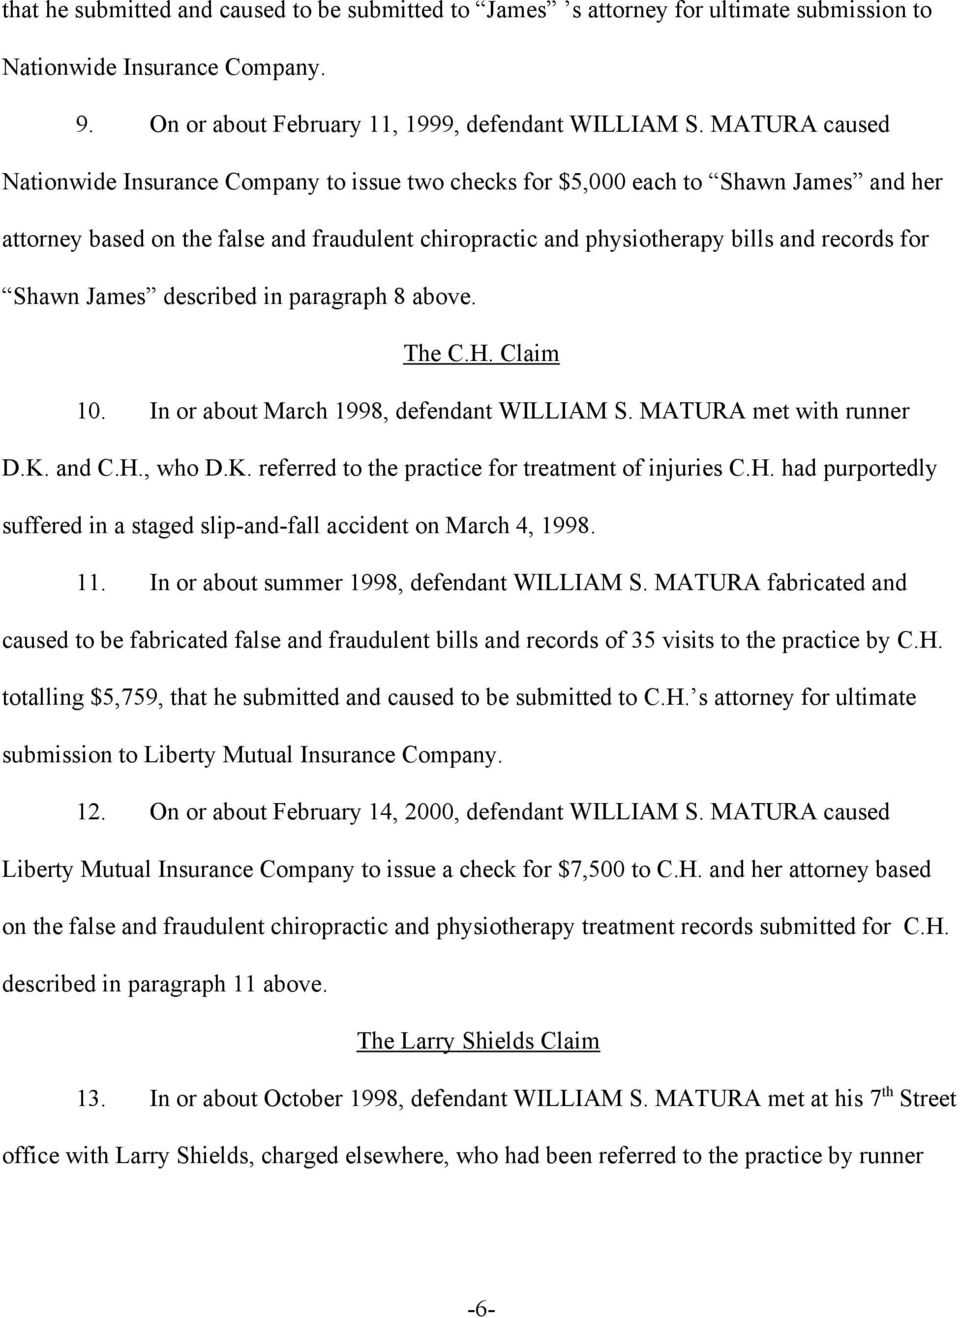 Shawn James described in paragraph 8 above. The C.H. Claim 10. In or about March 1998, defendant WILLIAM S. MATURA met with runner D.K. and C.H., who D.K. referred to the practice for treatment of injuries C.